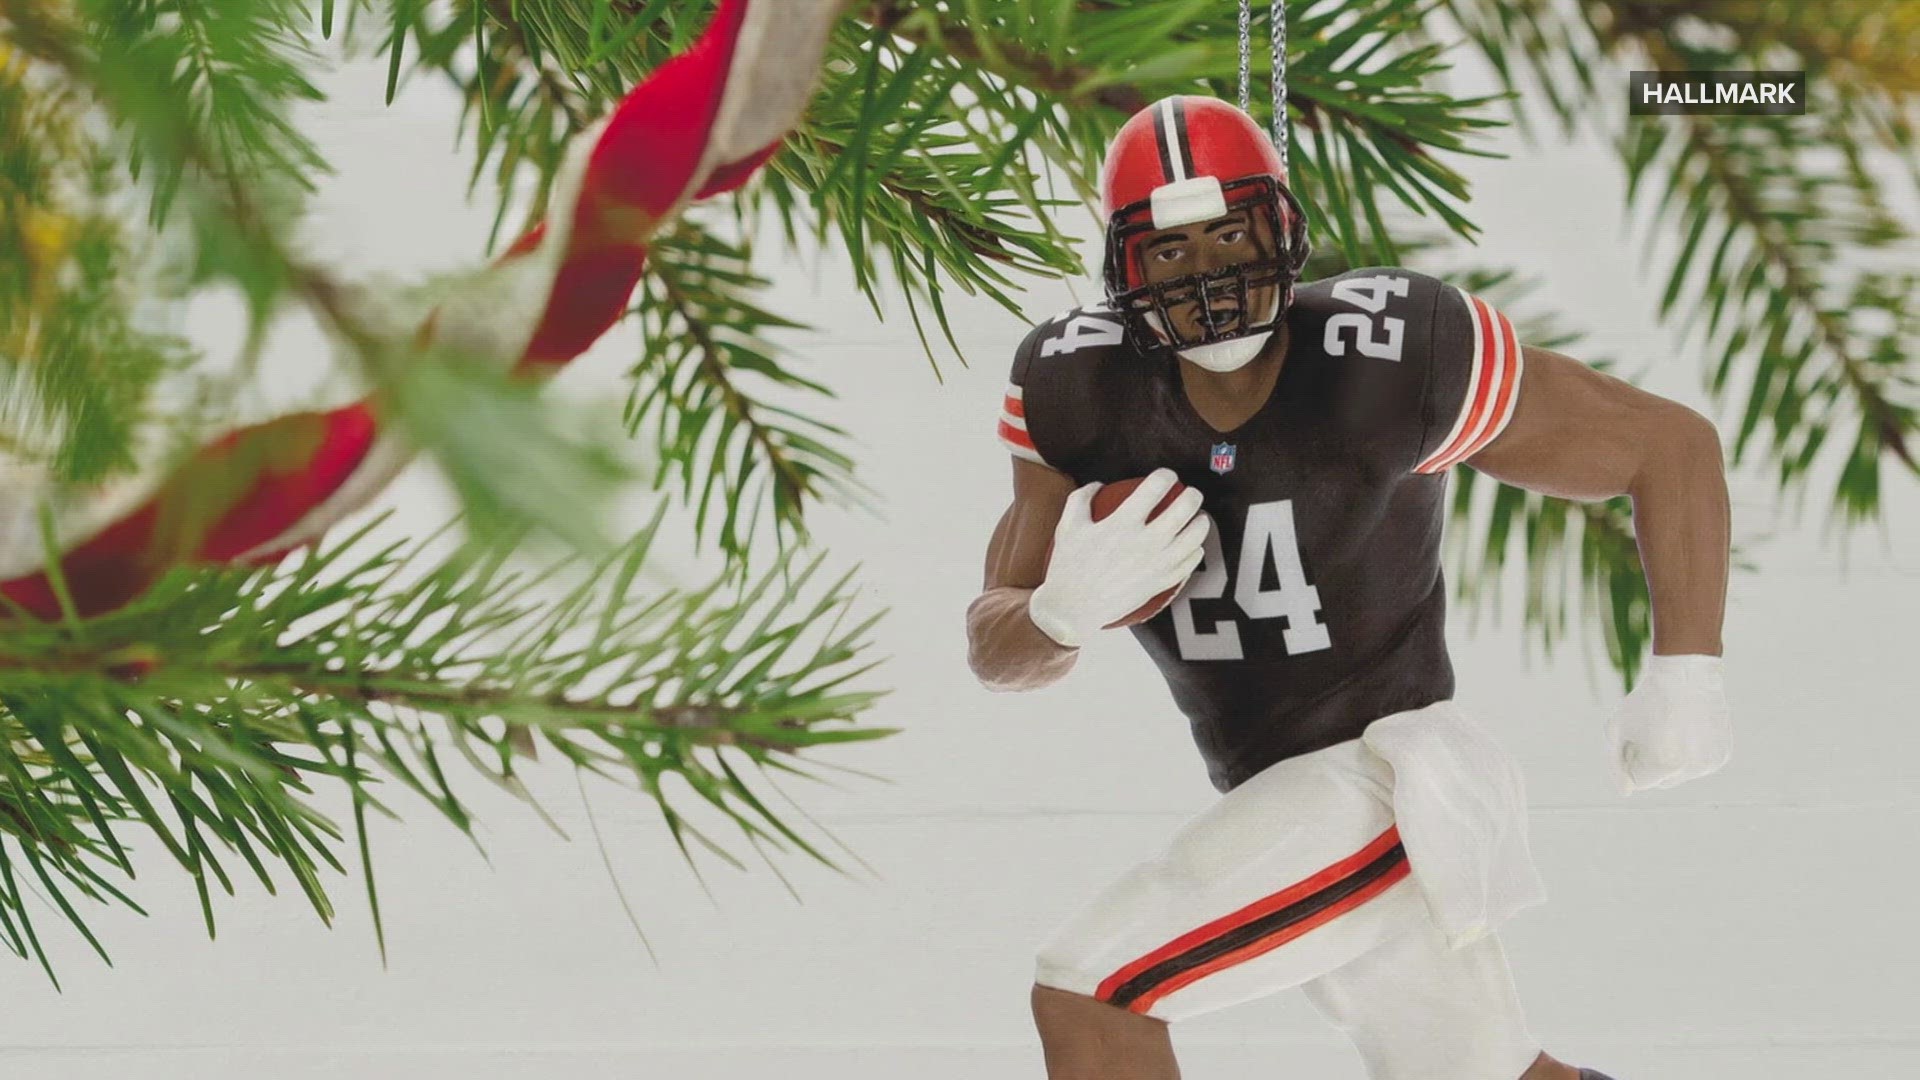 Cleveland Browns fans everywhere will rush to get their hands on this Nick Chubb Christmas tree ornament.